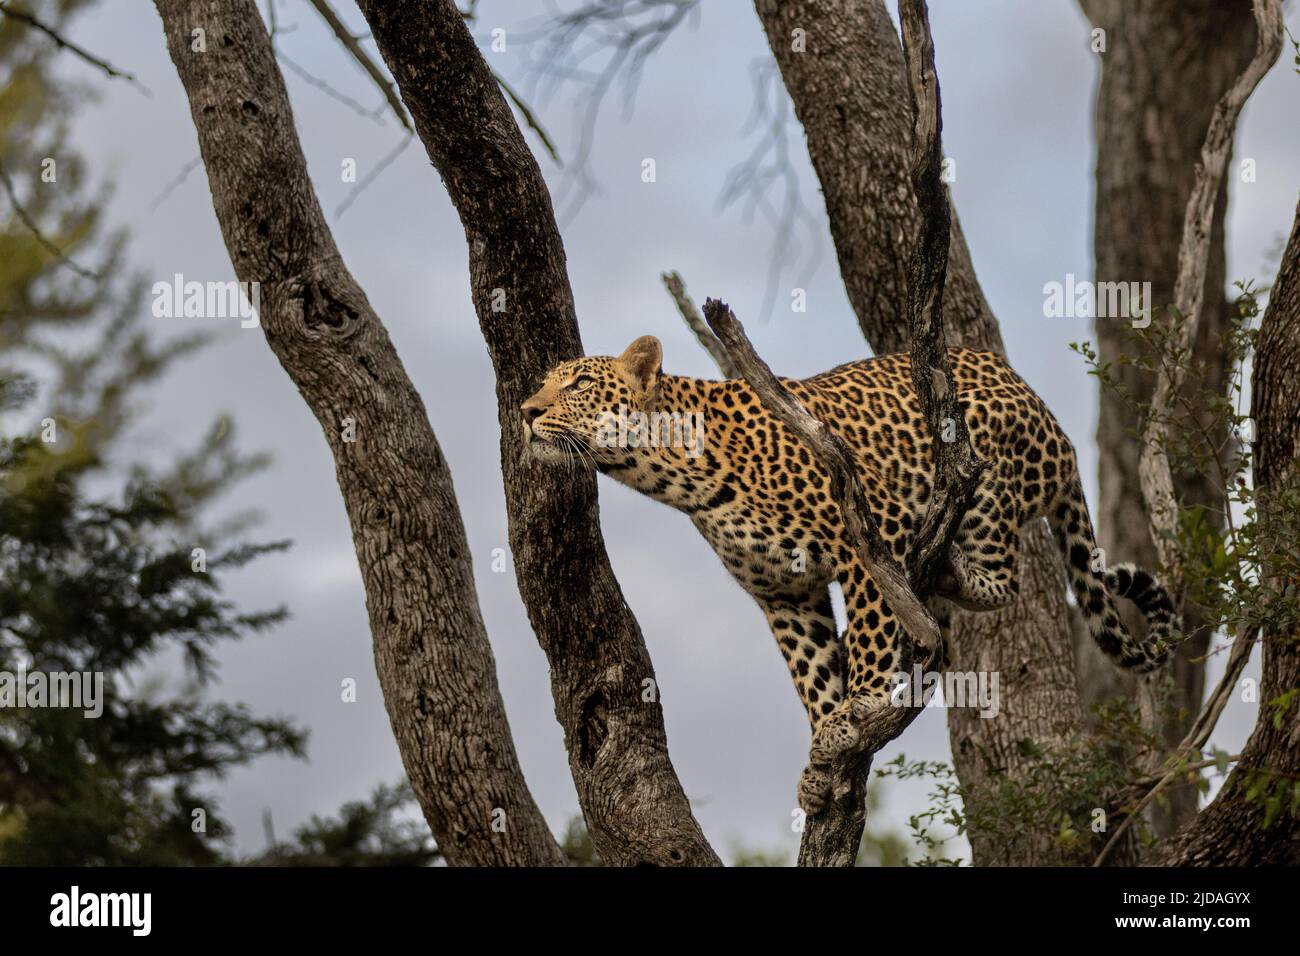 A leopard, Panthera pardus, gets ready to jump in a tree, looking up Stock Photo